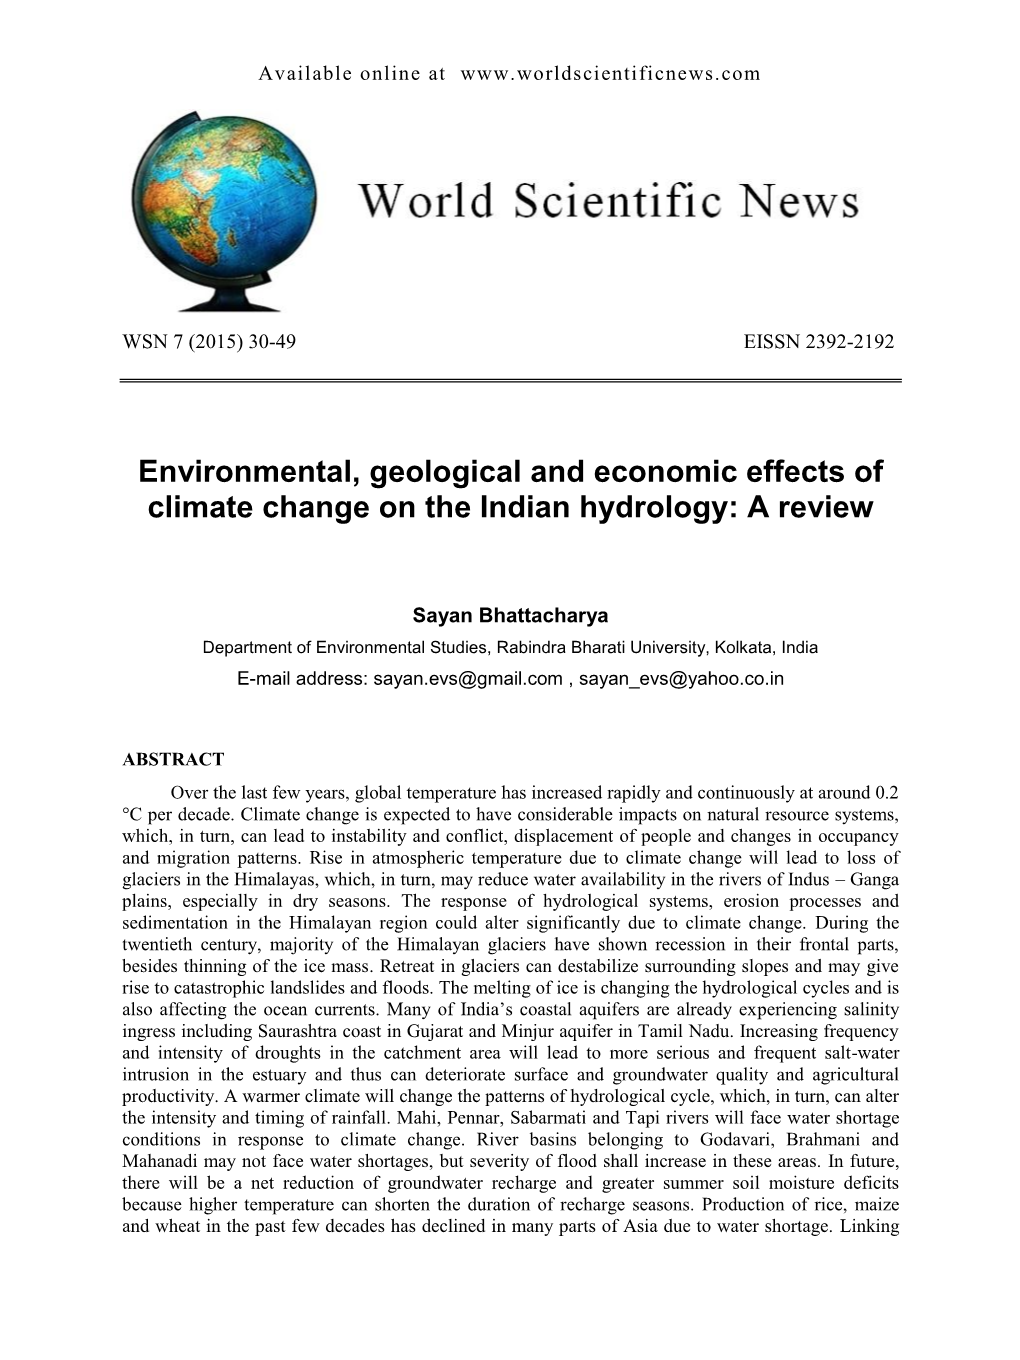 Environmental, Geological and Economic Effects of Climate Change on the Indian Hydrology: a Review